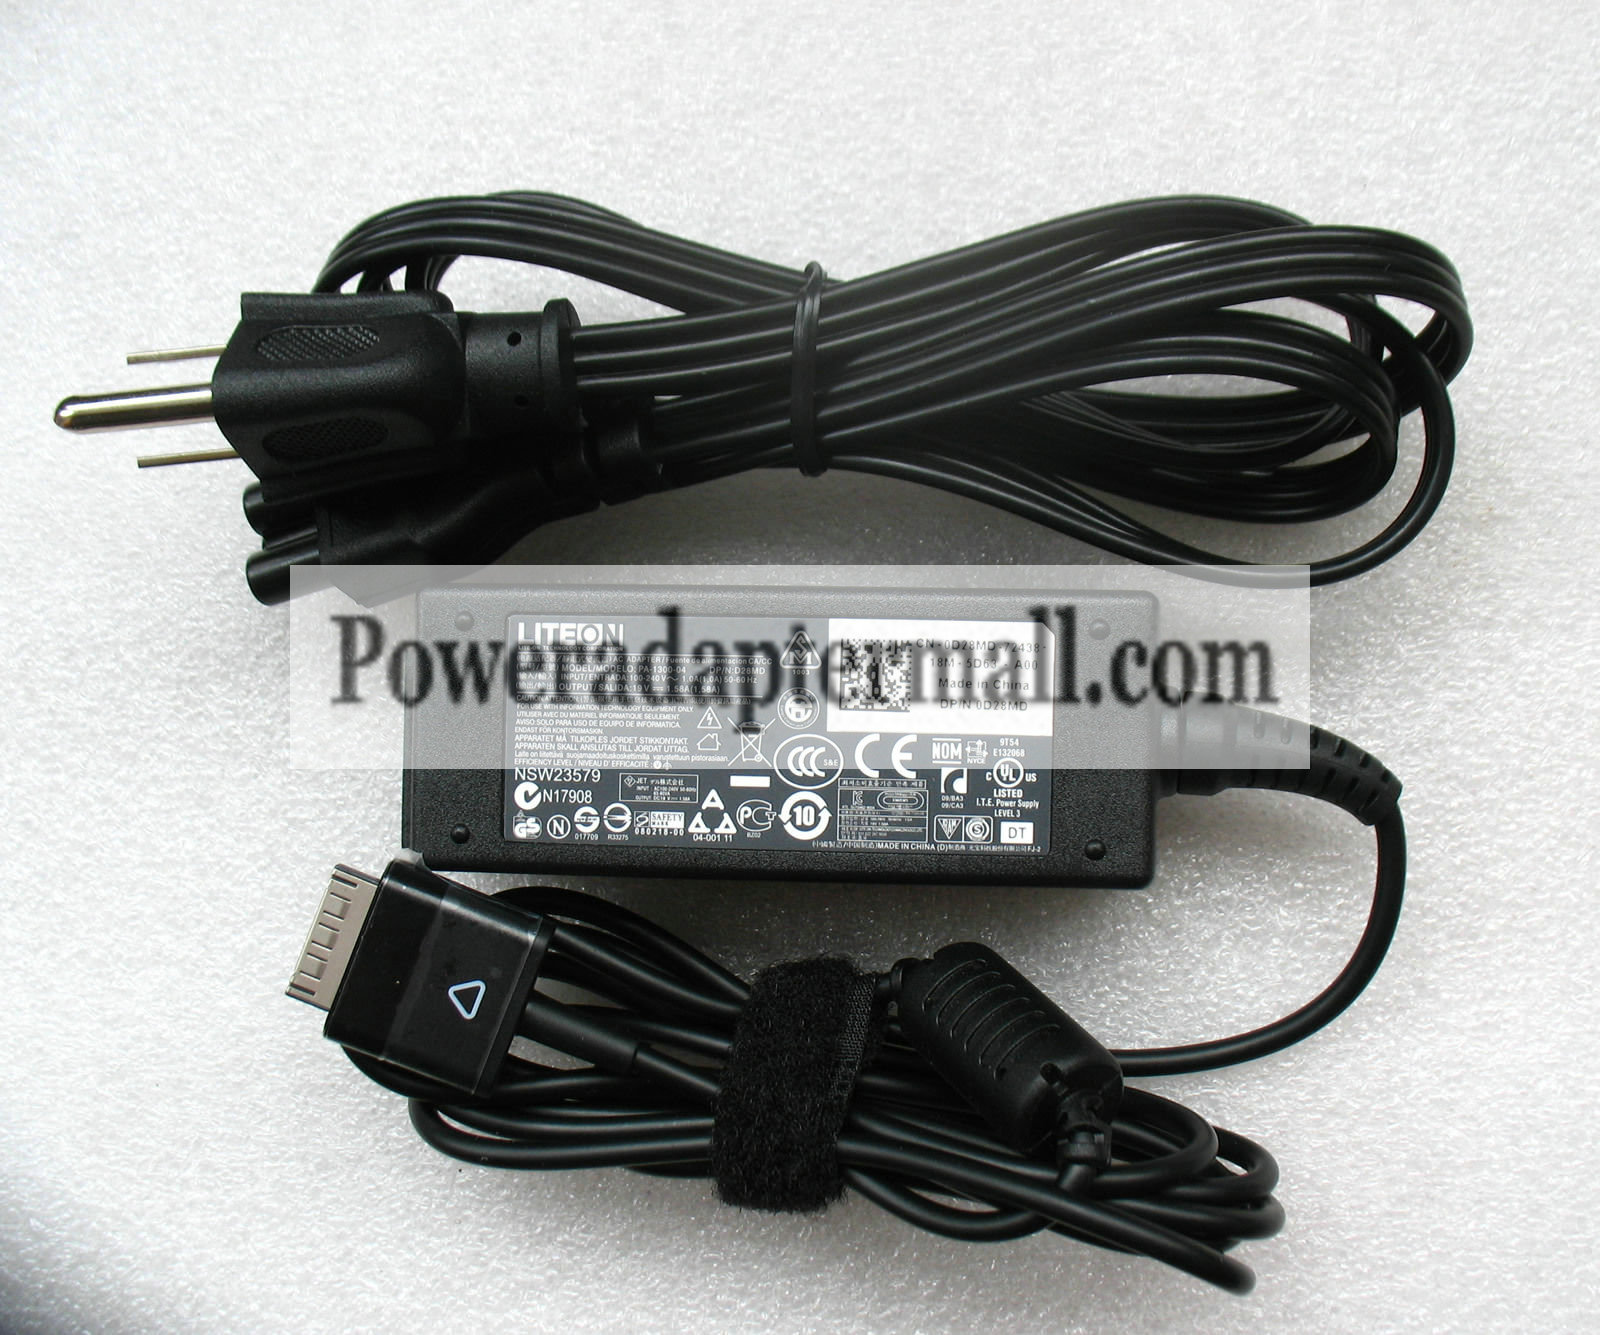 New Dell D28MD WNXV2 19V 1.58A 40 pin AC Power Adapter